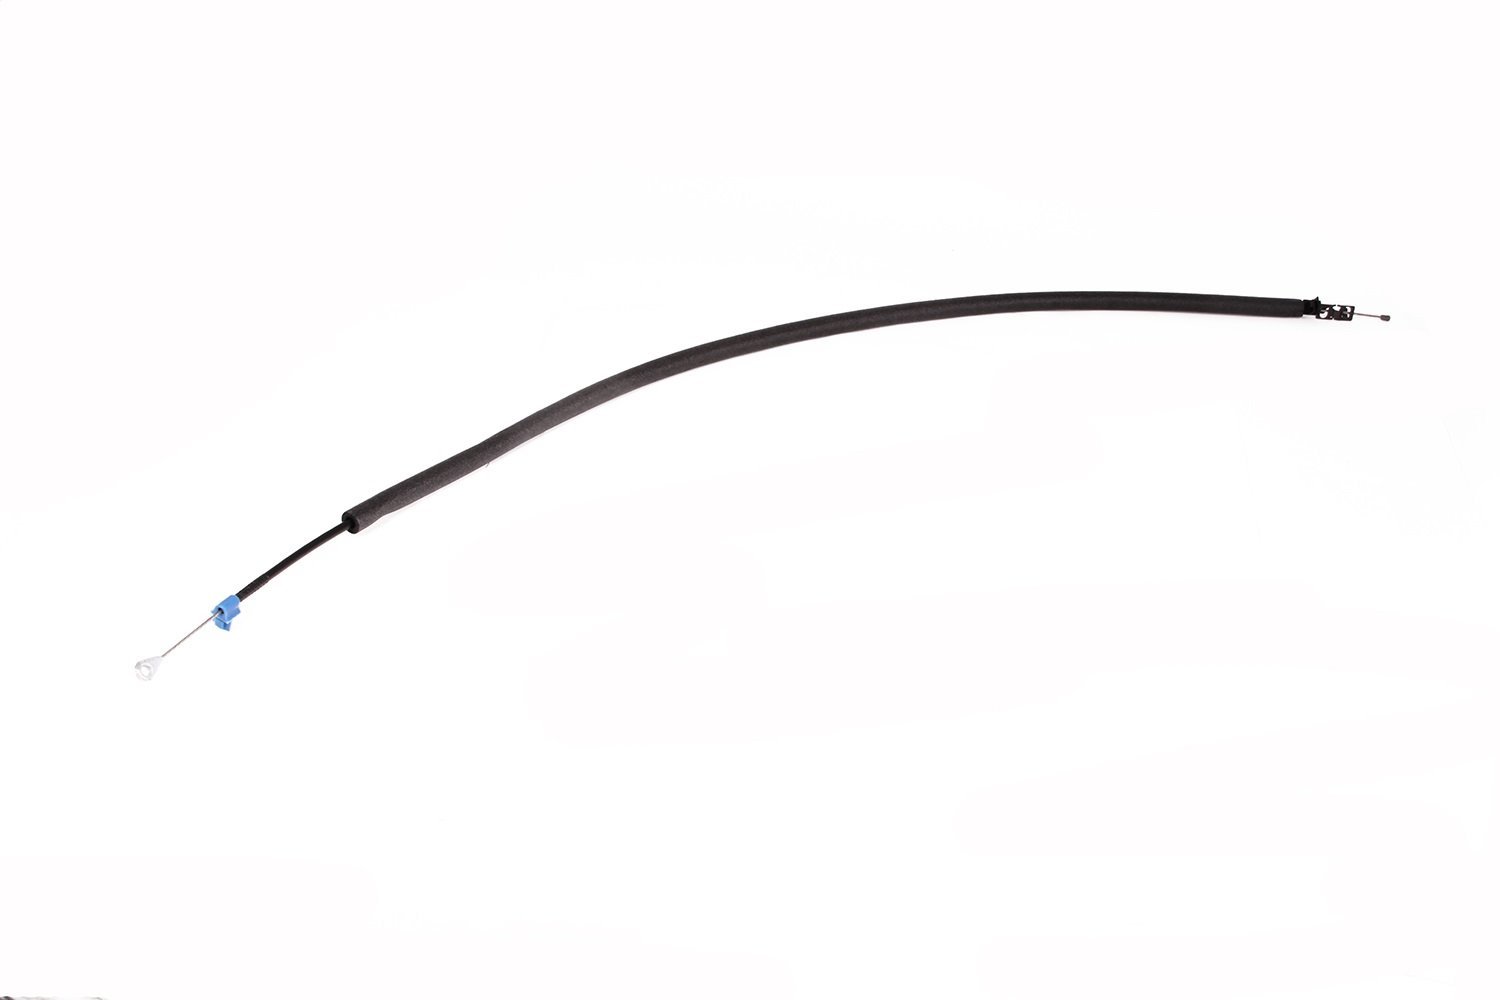 This temperature control cable from Omix-ADA fits 87-95 Jeep Wranglers. It has a blue mark on the end of the cable.